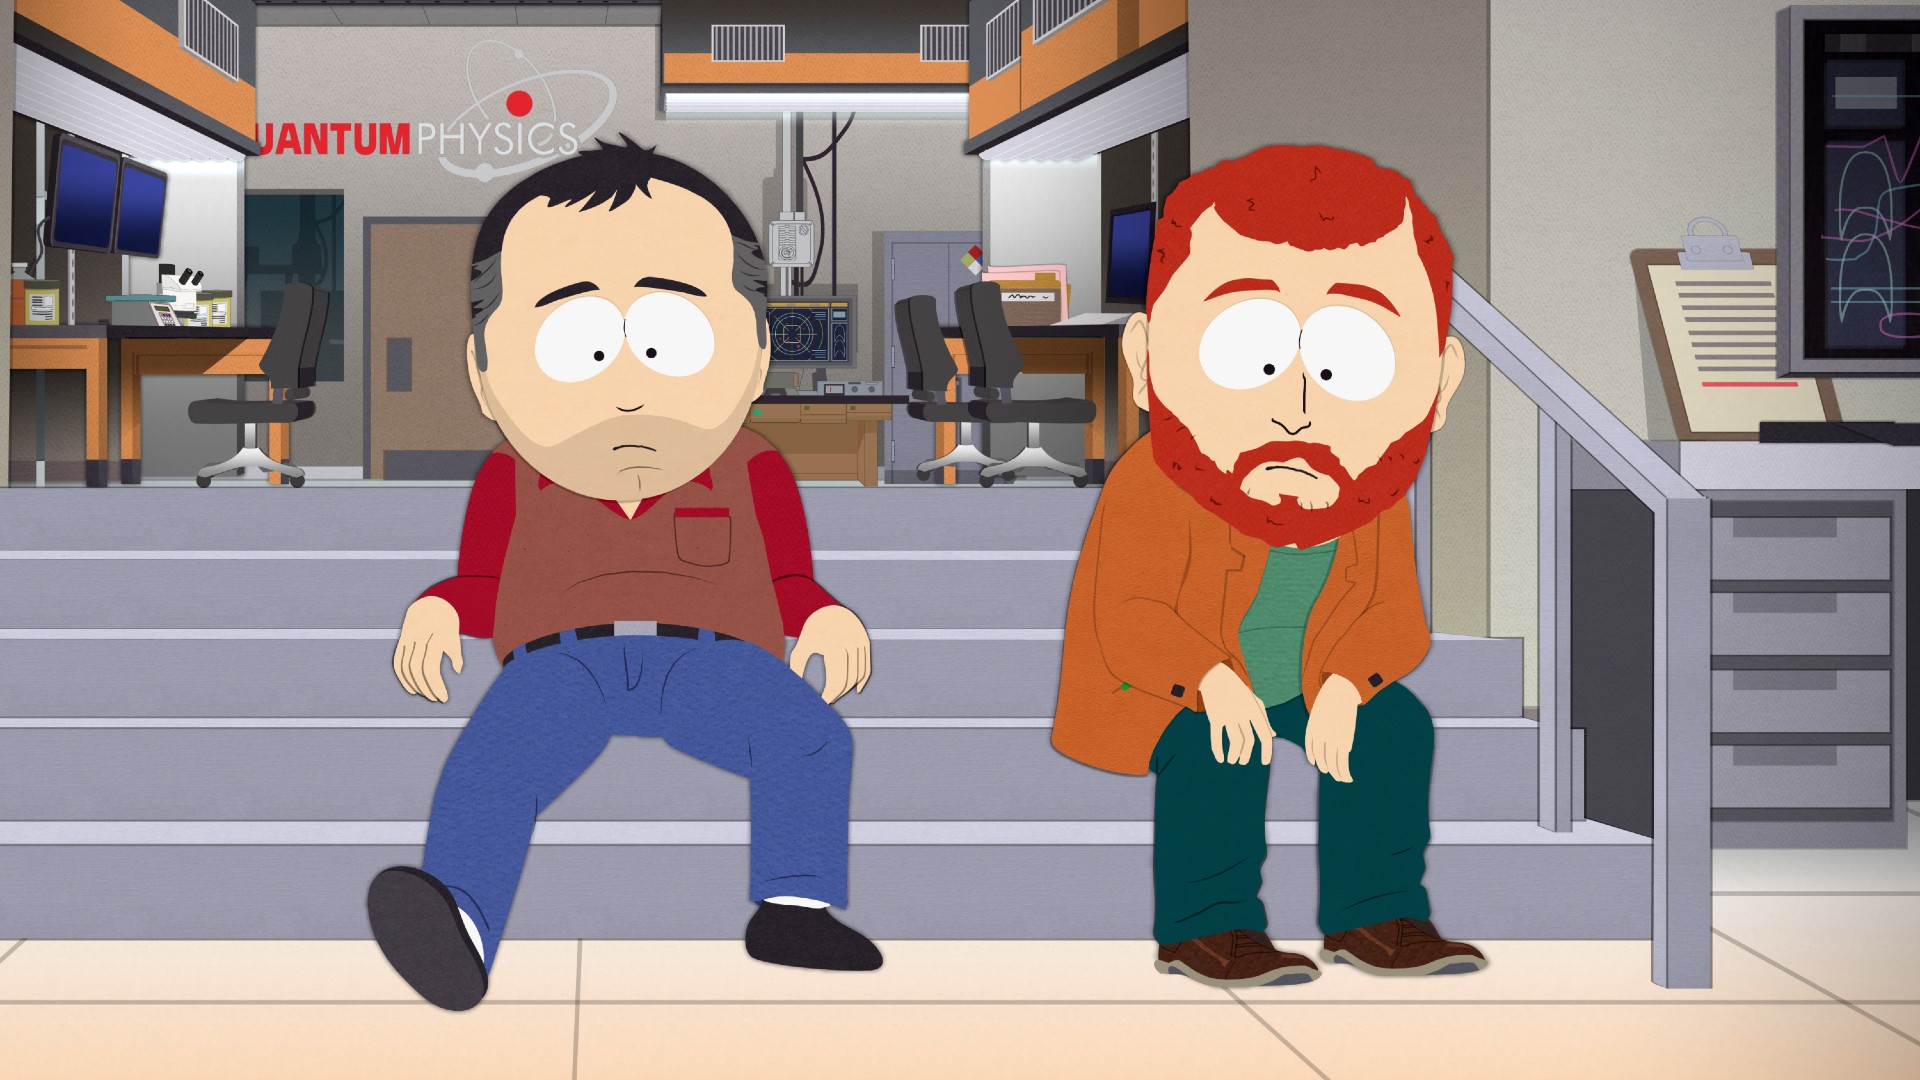 South Park: The Streaming Wars Part 3 Updates - Everything We Know